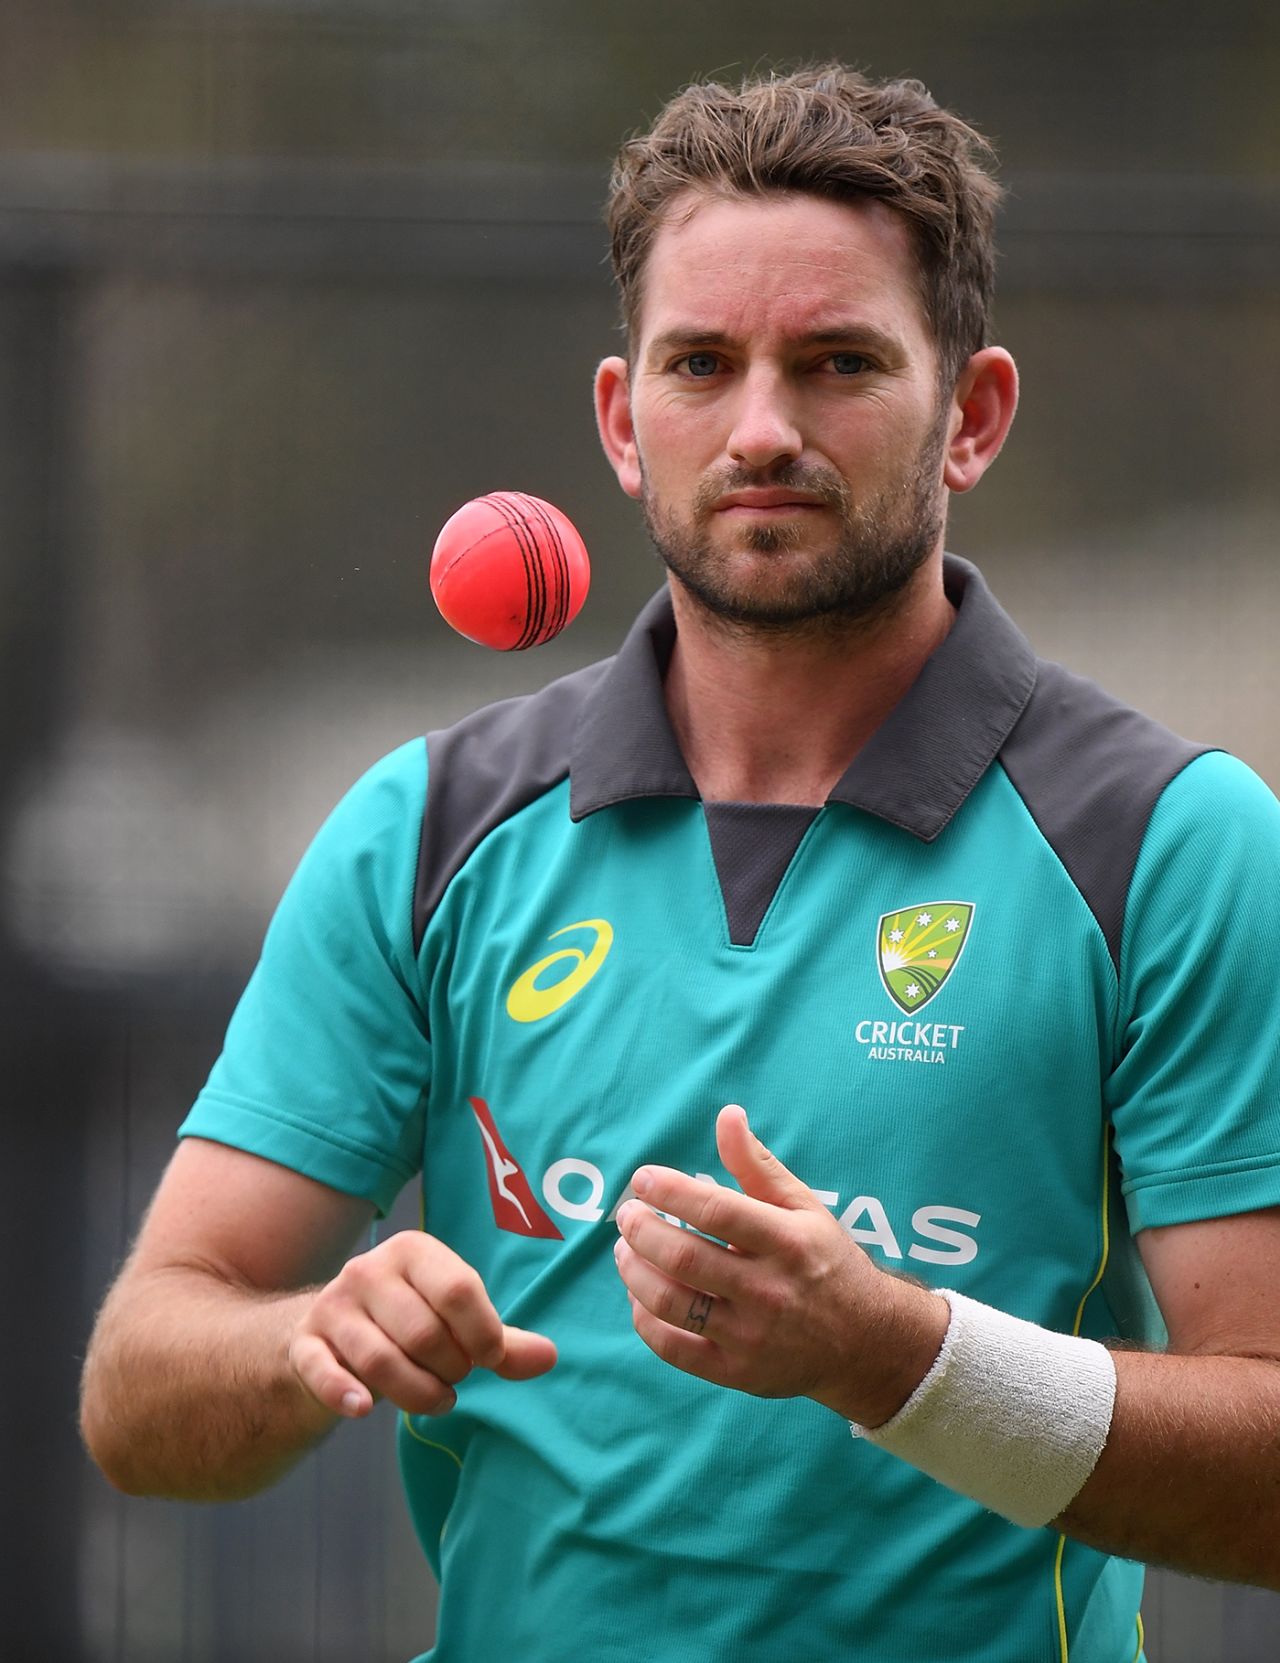 Chadd Sayers prepares to bowl during a training session, The Ashes 2017-18, Adelaide, November 30, 2017